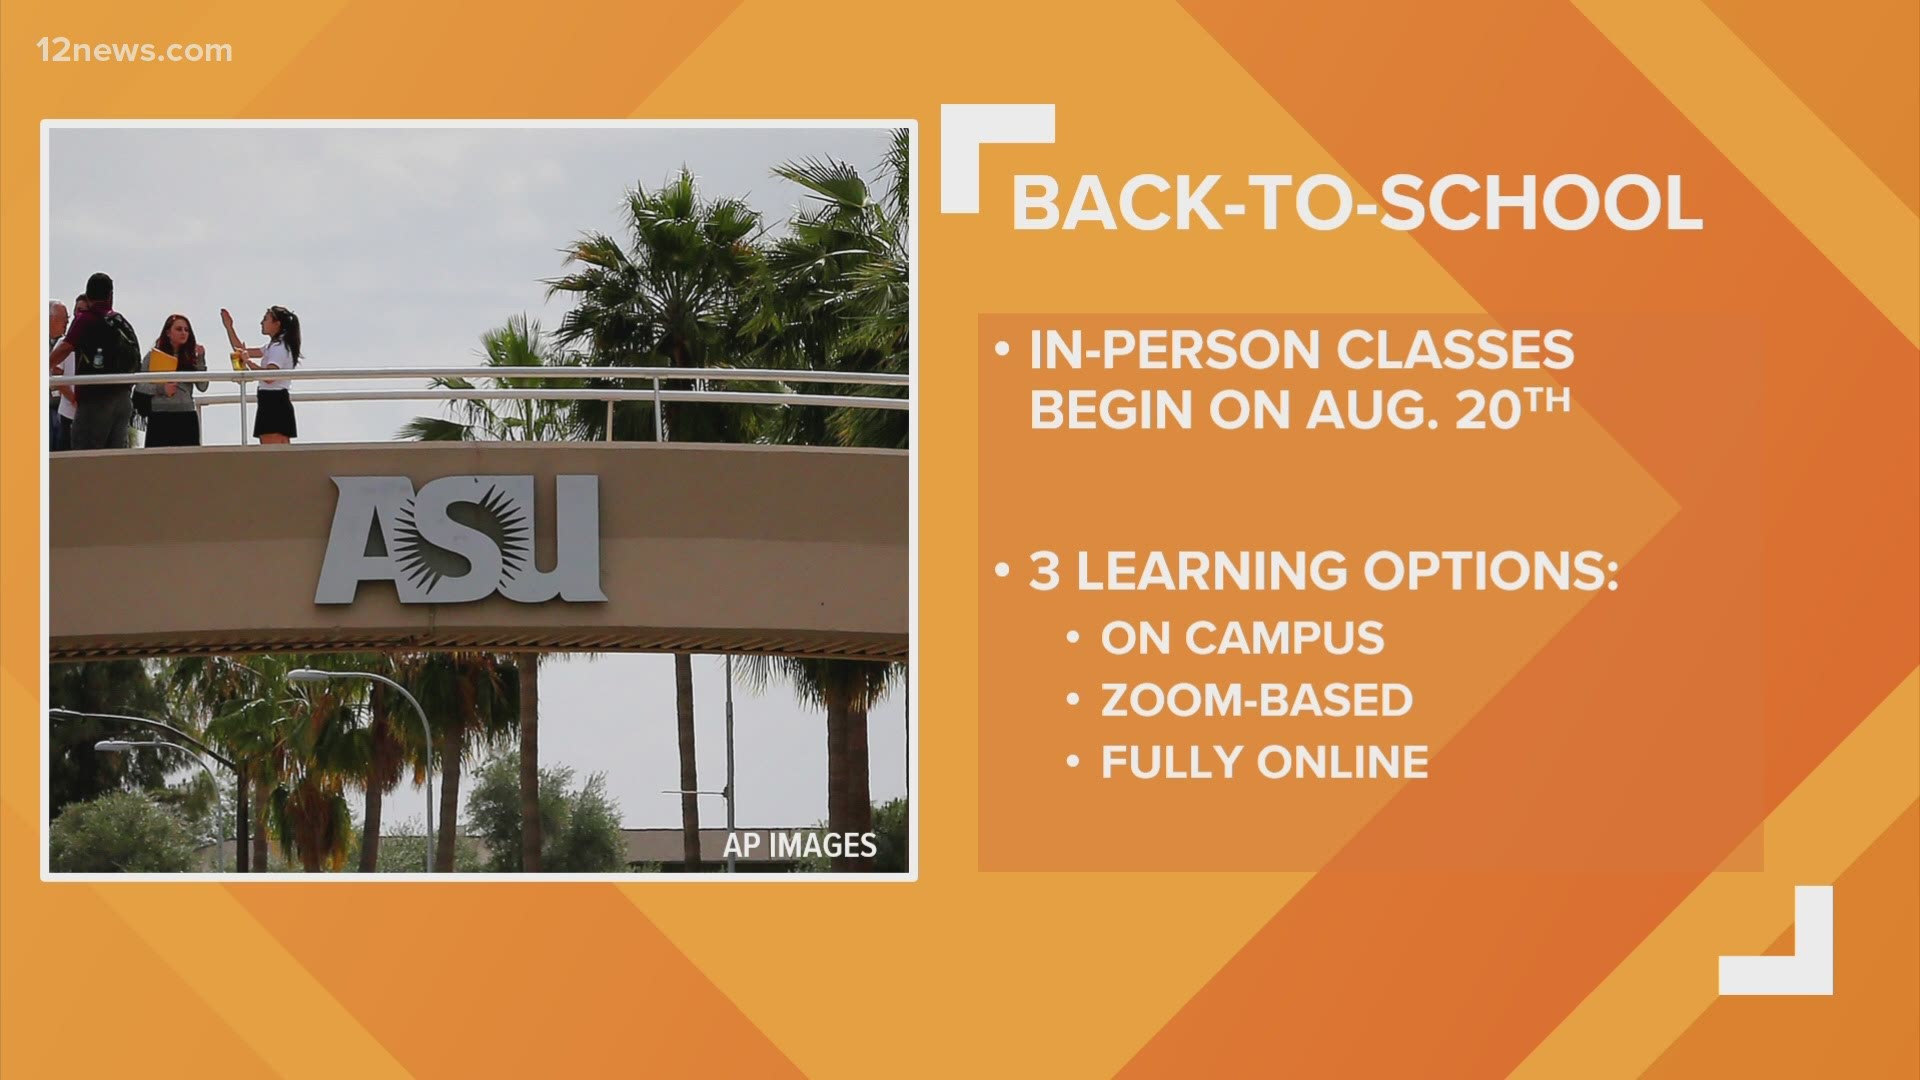 Campus life and learning is going to look a lot different for ASU students as they start the new school year. Jen Wahl has more.